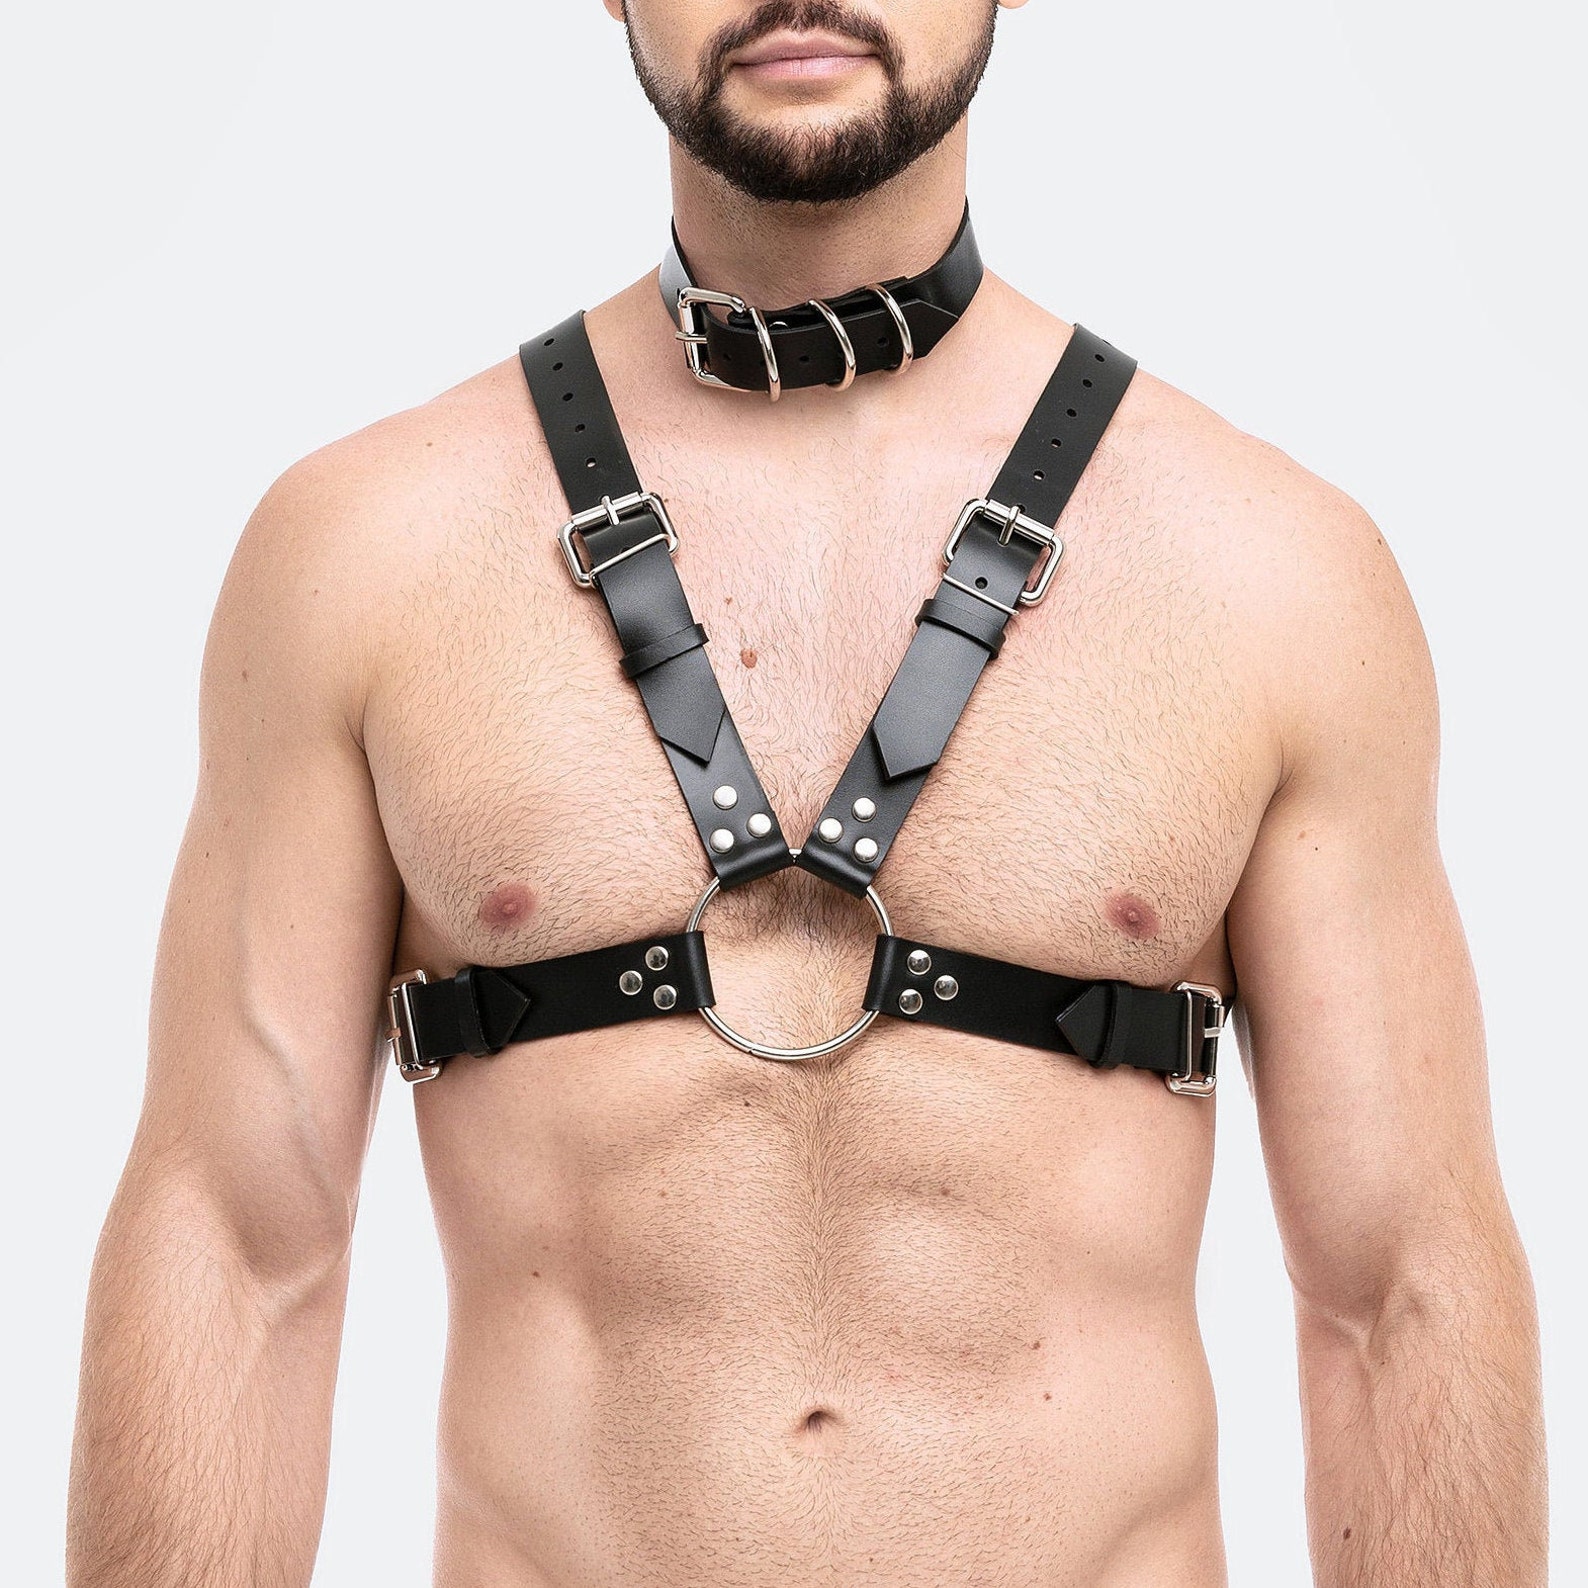 X Harness Men Chest Harness Male Leather Body Harness Etsy